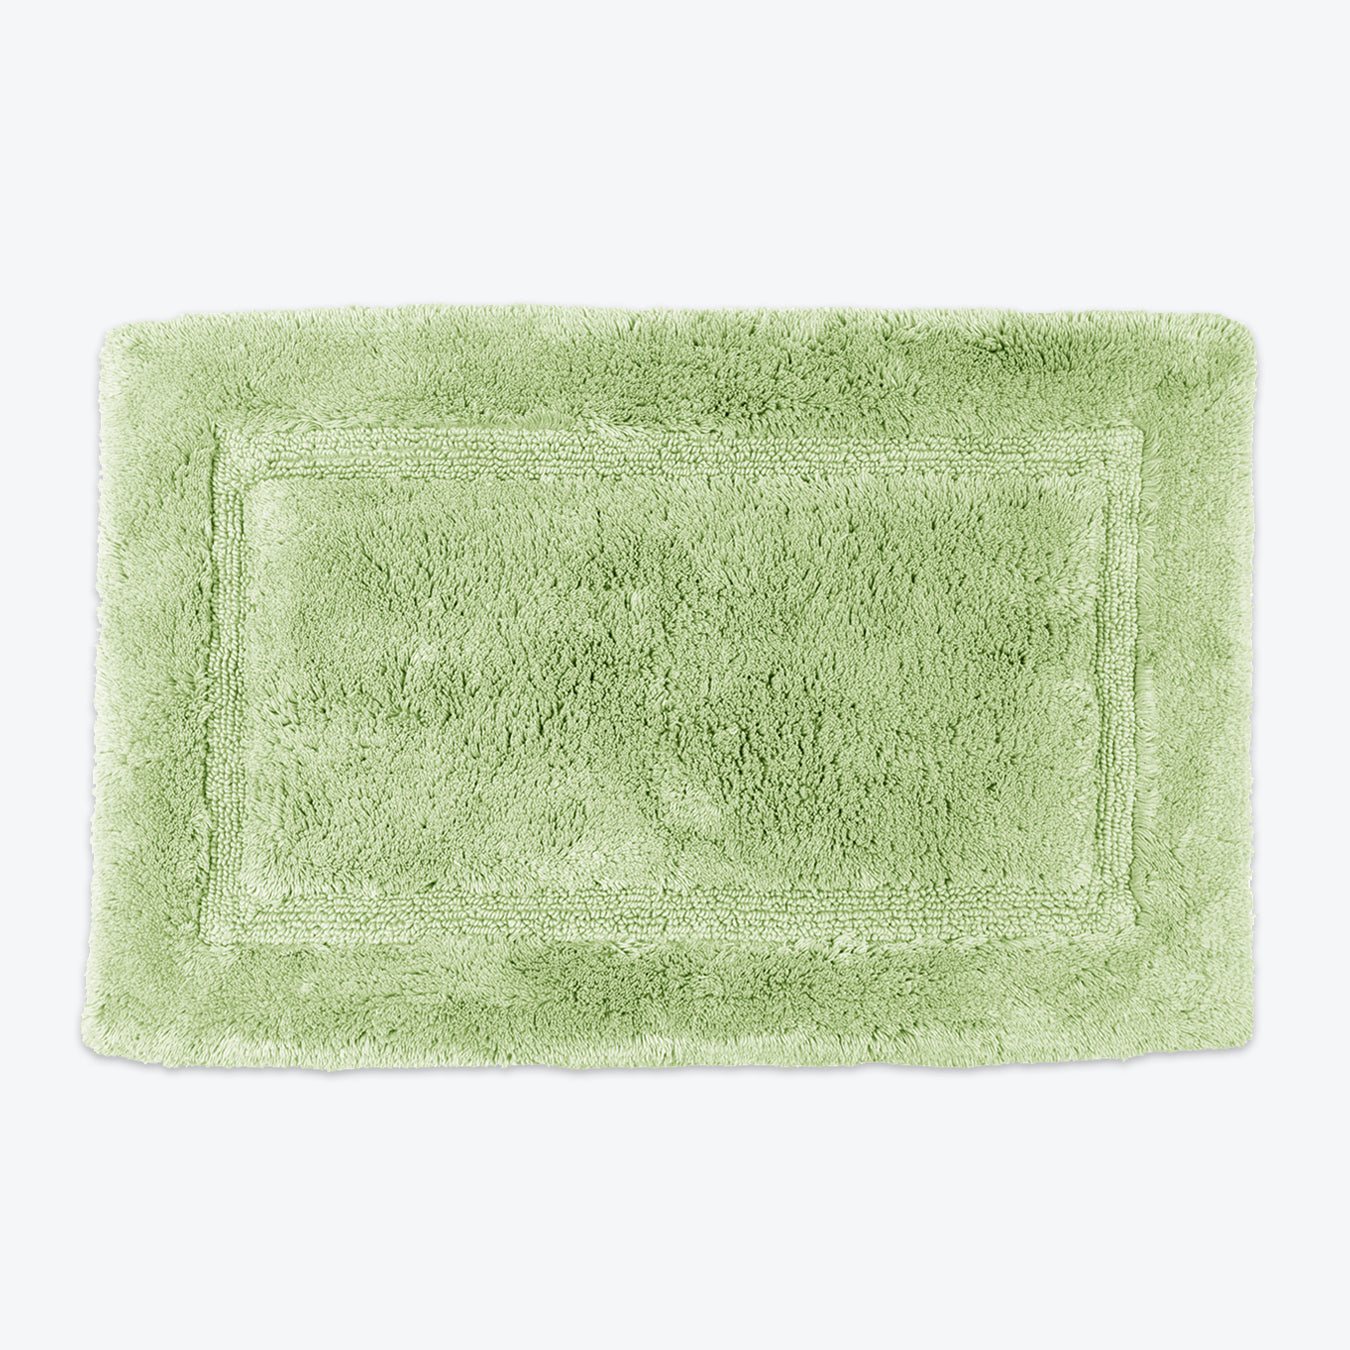 Celadon Green Bamboo Bath Mats - Super Soft and Hypo-Allergenic